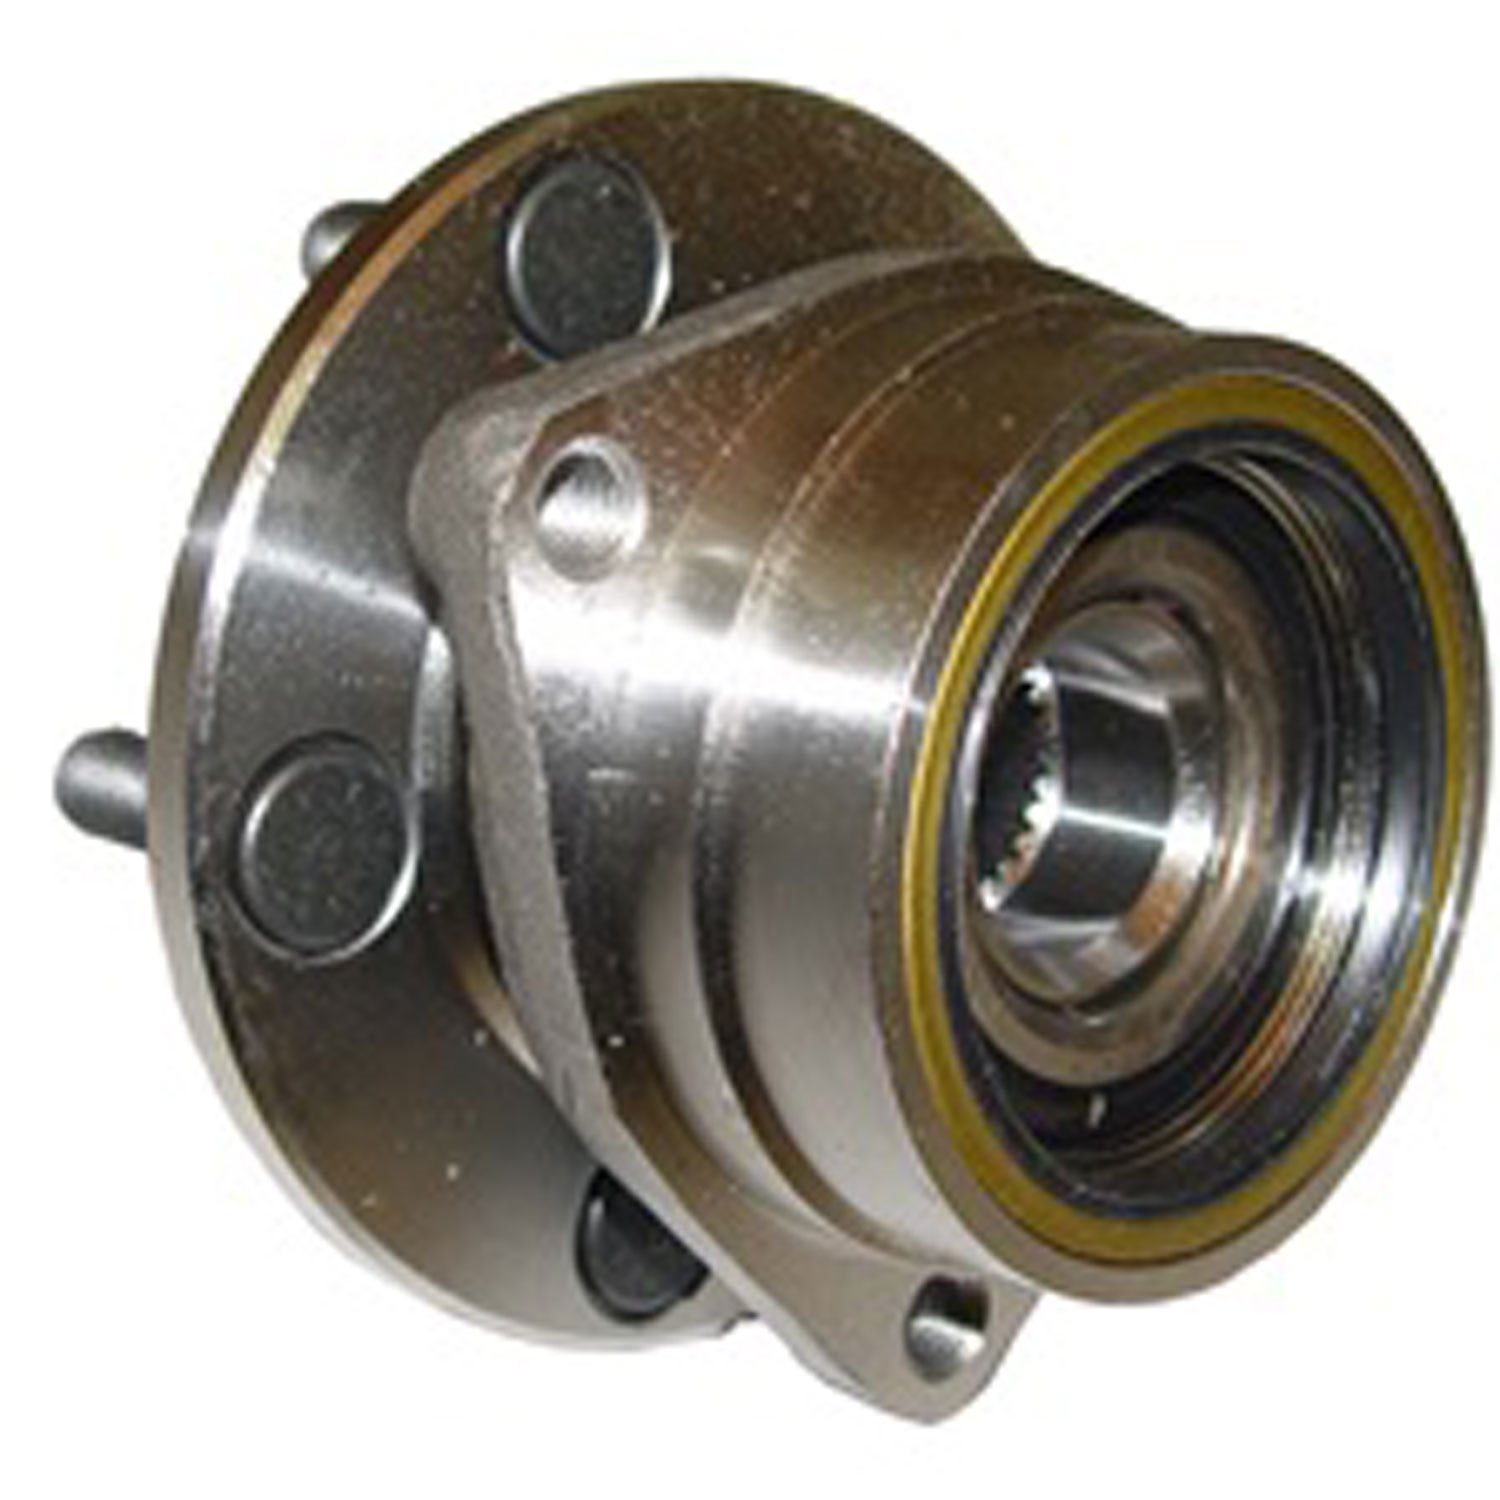 This front axle hub assembly from Omix-ADA fits 84-89 Jeep Cherokee XJ and 87-89 Wrangler YJ Fits the left or right side.